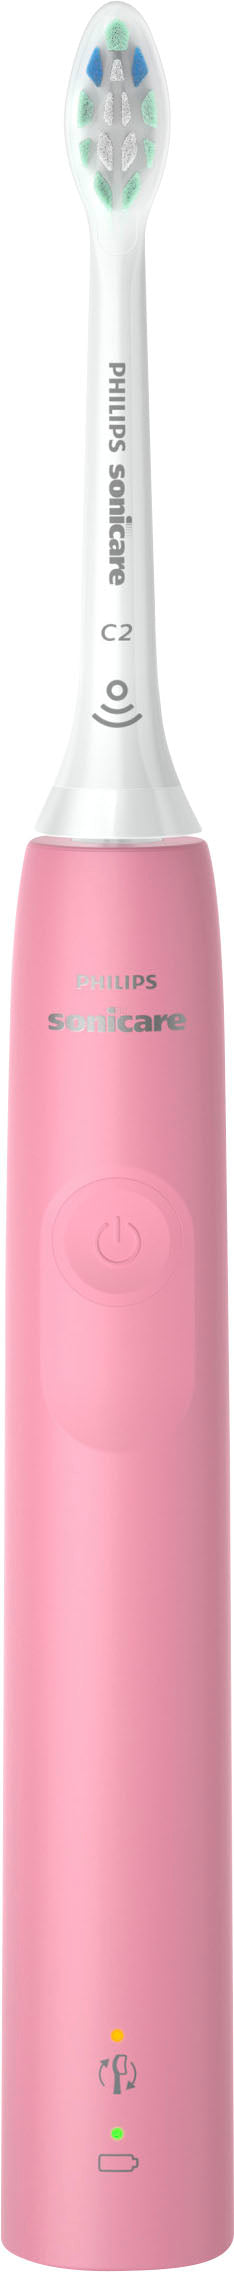 Philips Sonicare 4100 Power Toothbrush - Deep Pink_2